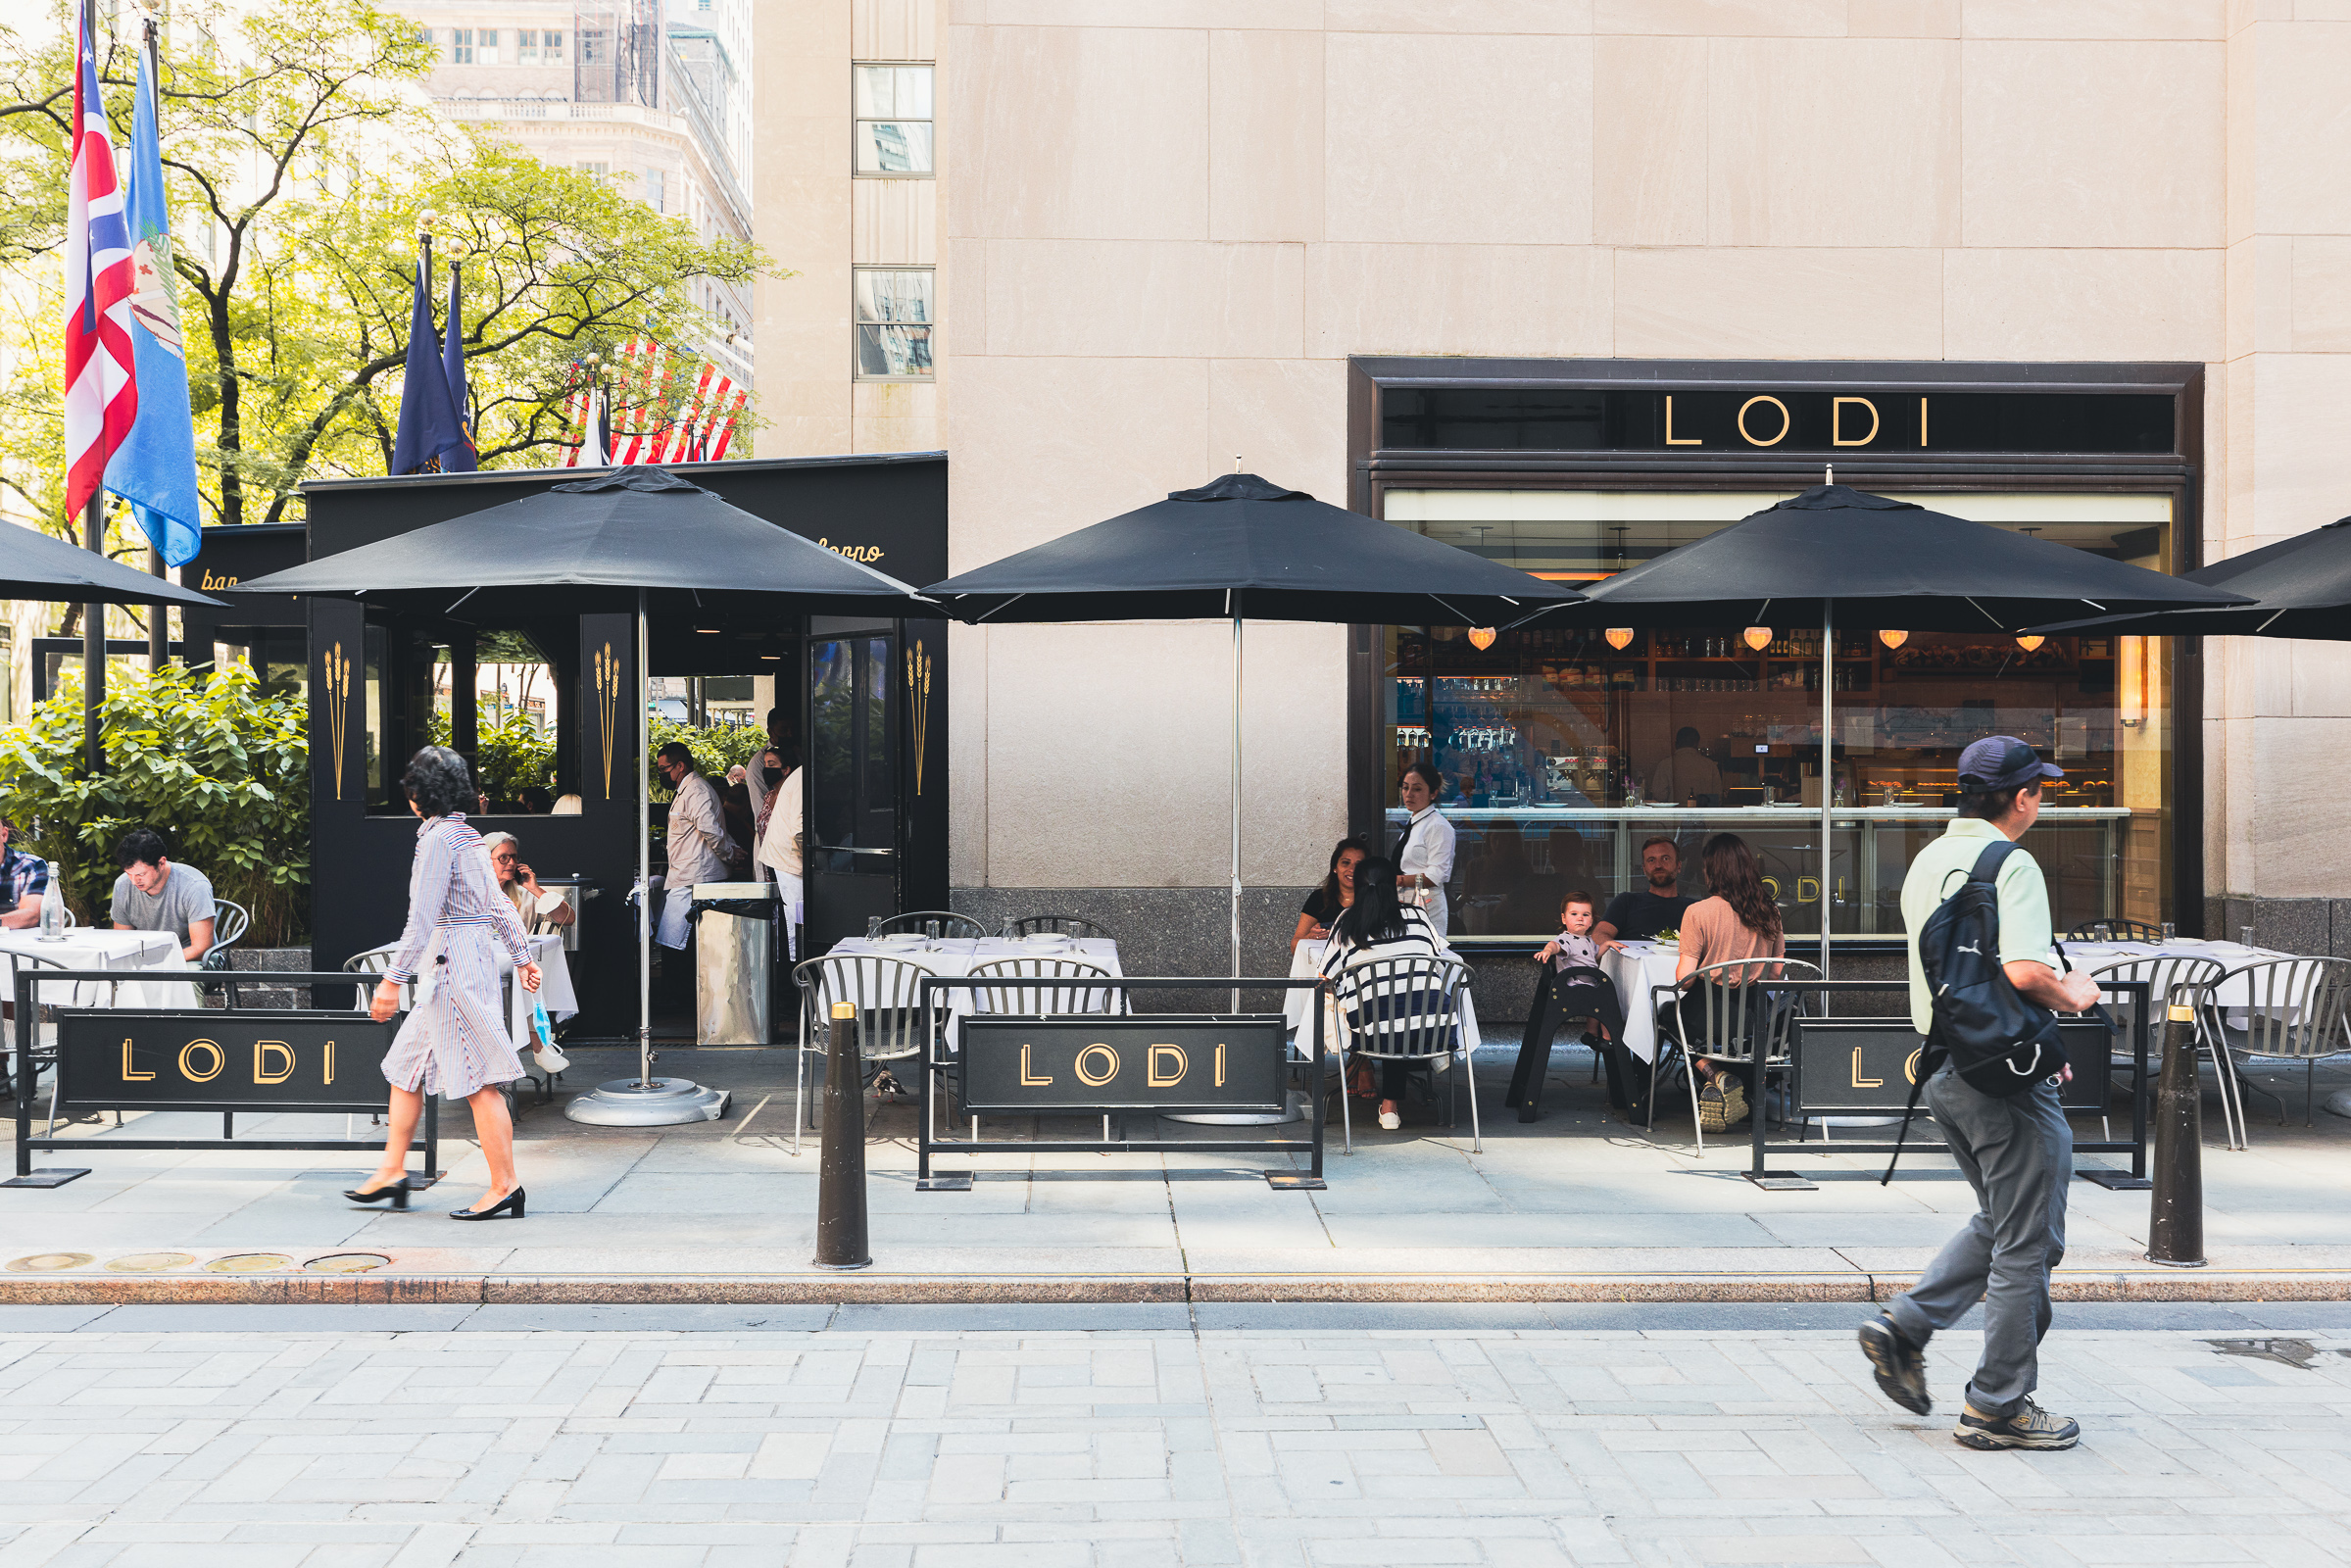 Tourists pass in front of Lodi, one of several restaurants that have opened at Rockefeller Center in Manhattan.